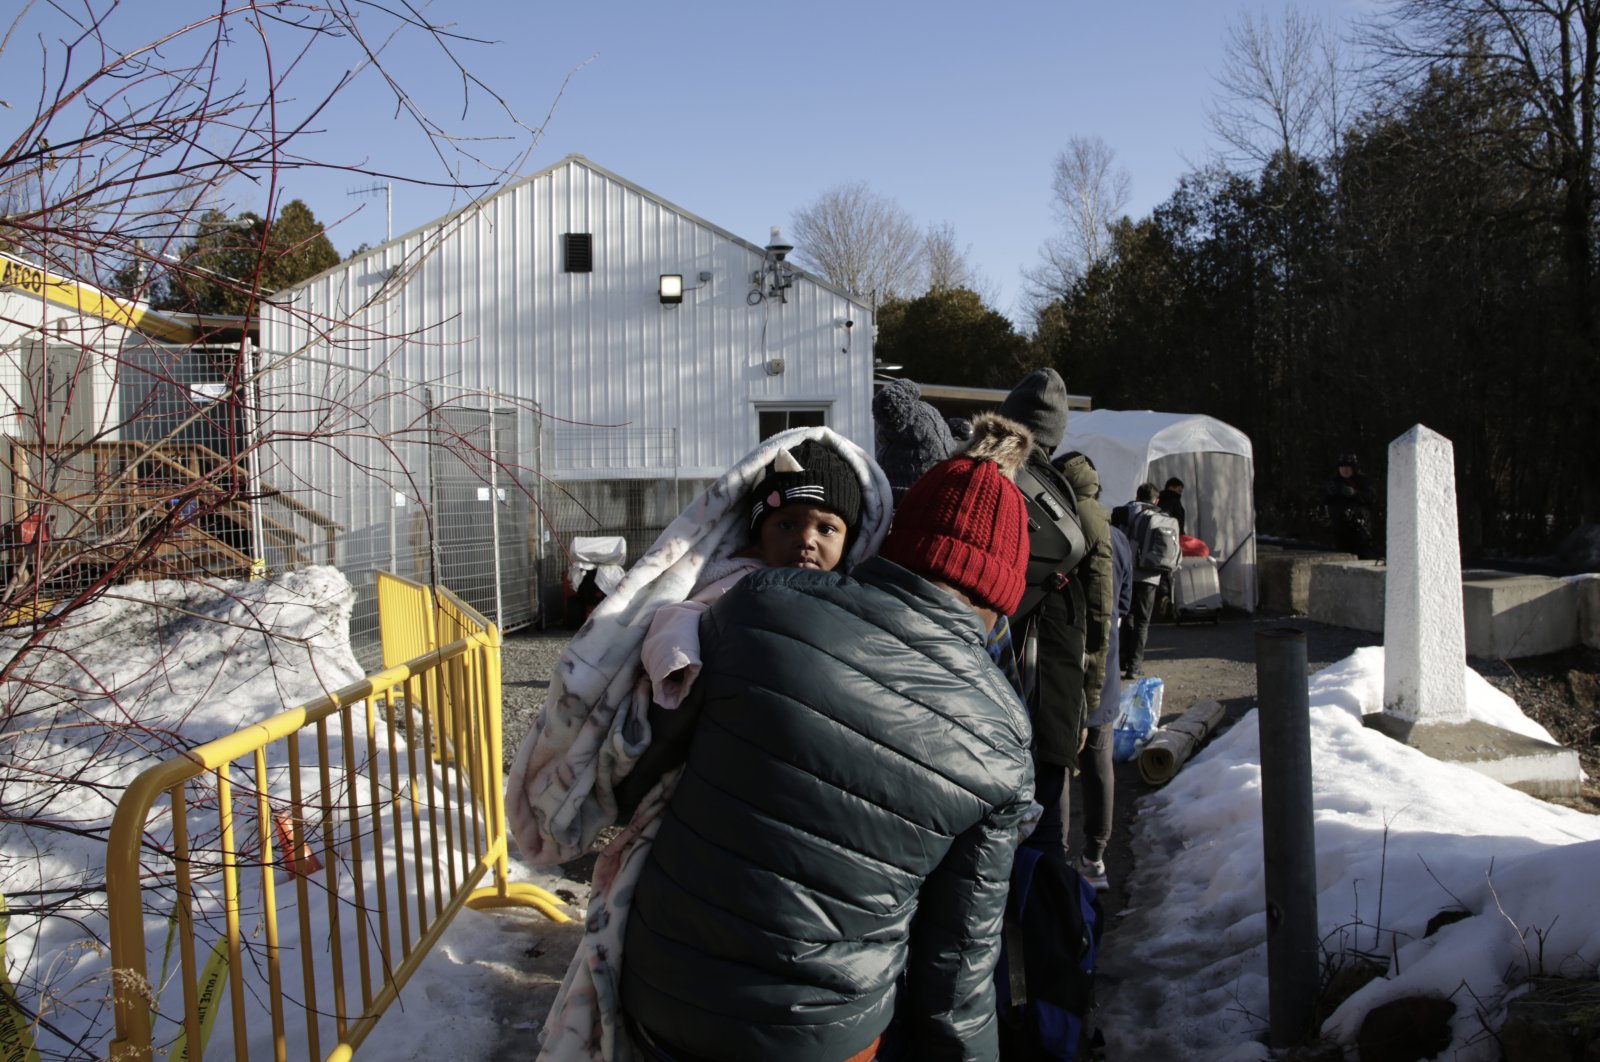 Haitian and Afghani asylum-seekers illegally cross into Canada where police took them into custody at the non-official Roxham Road border crossing, Champlain, New York, March 24, 2023. (AP Photo)